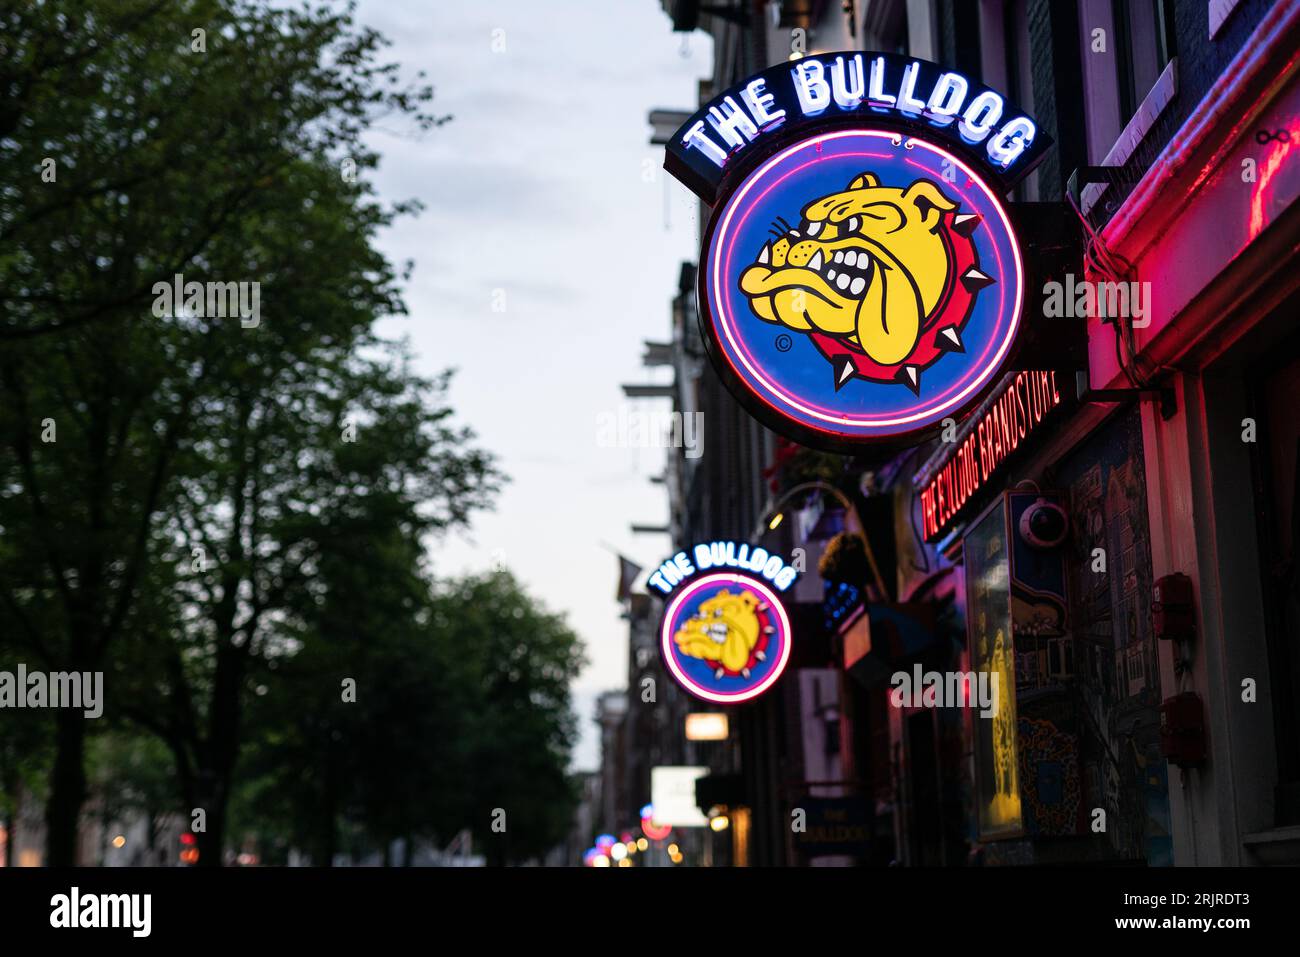 The Bulldog coffee shop in Amsterdam's red light district. Stock Photo